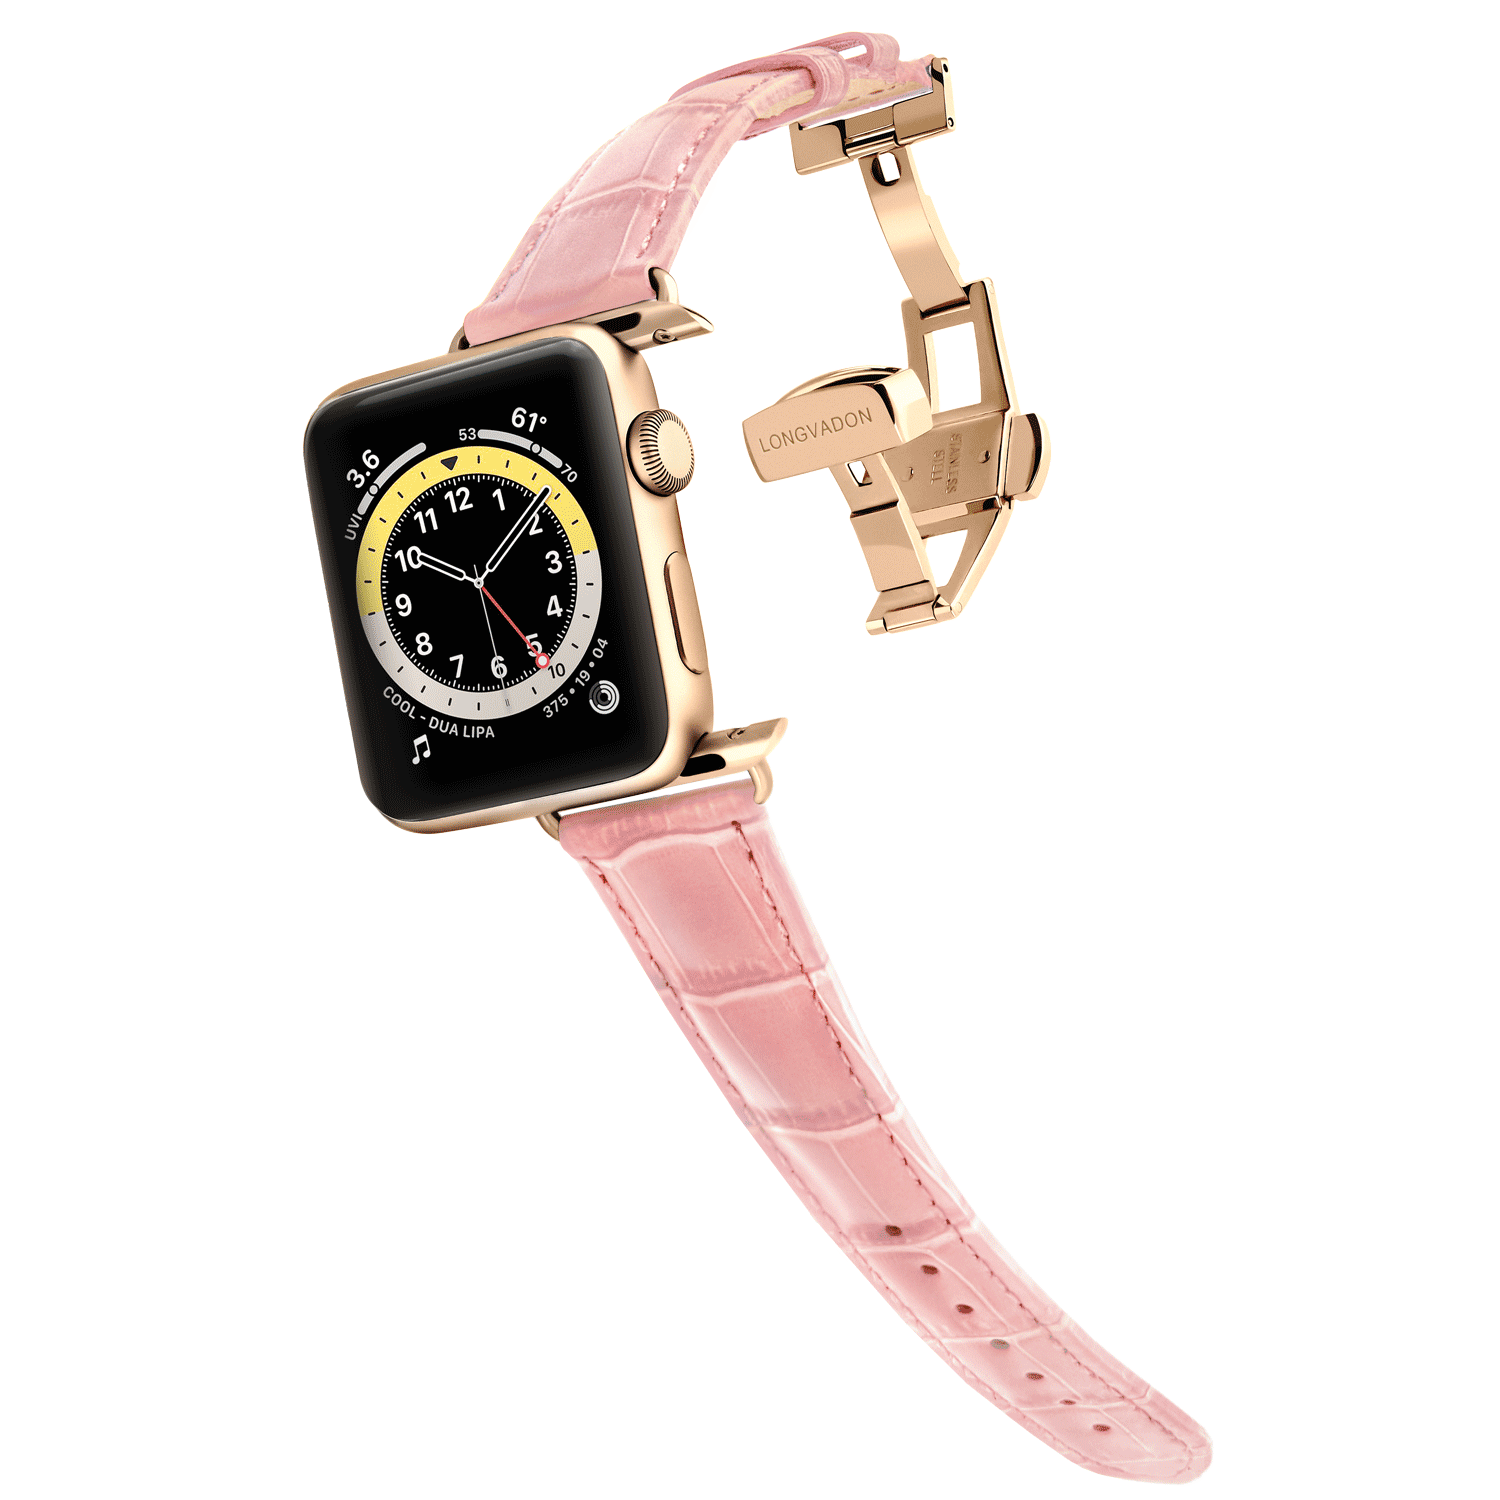 Women's Glossy Pink w/ Gold Details